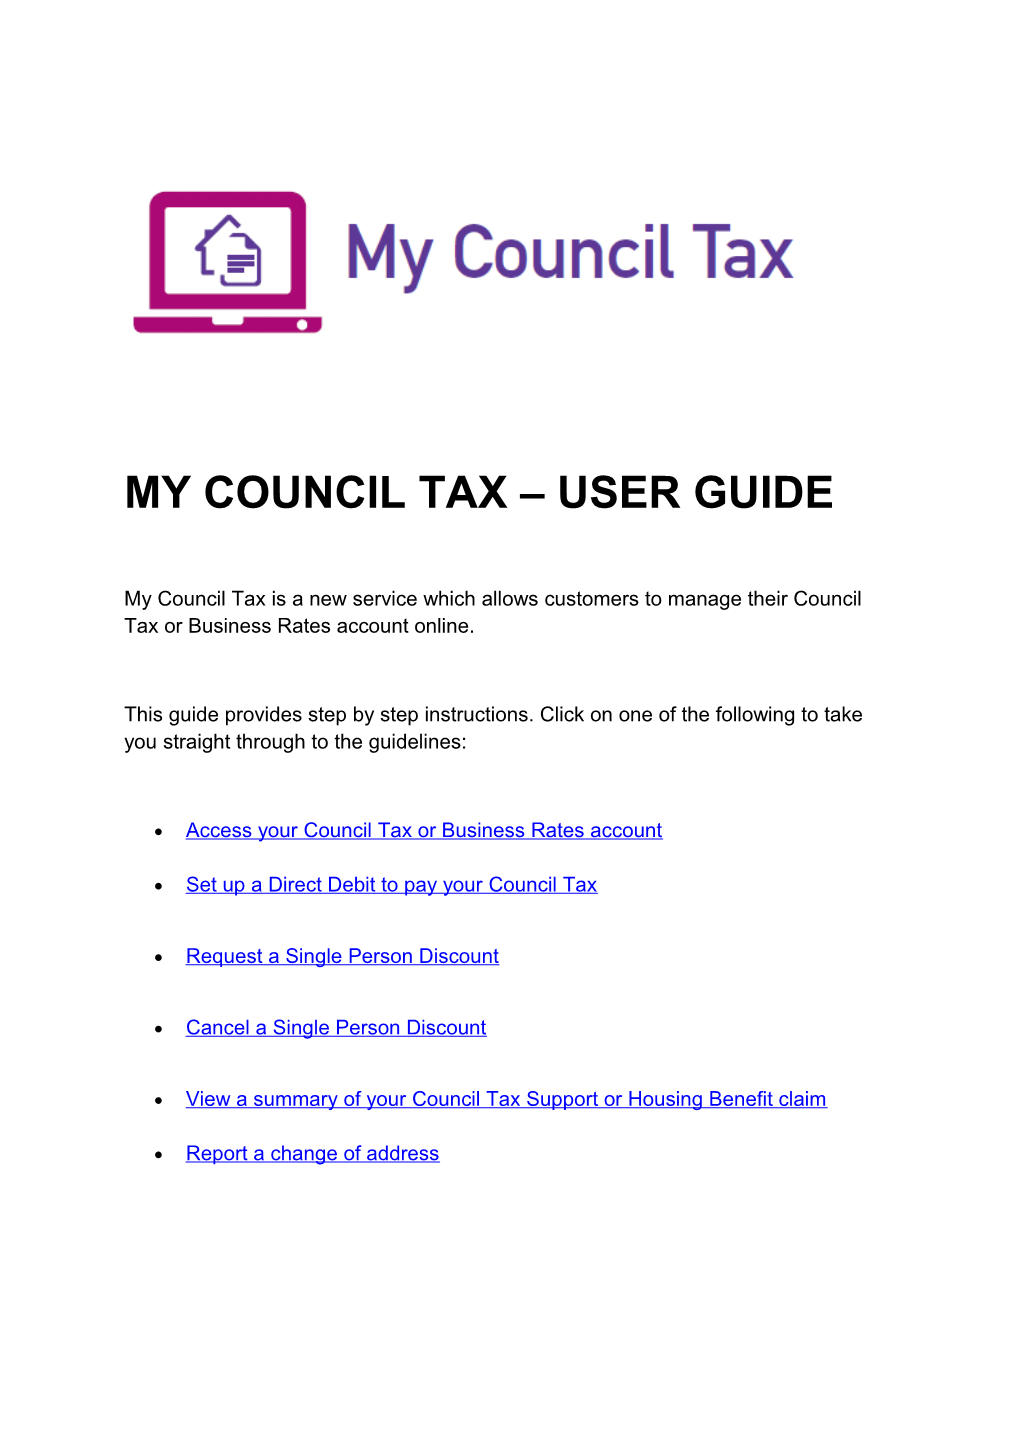 My Council Tax User Guide